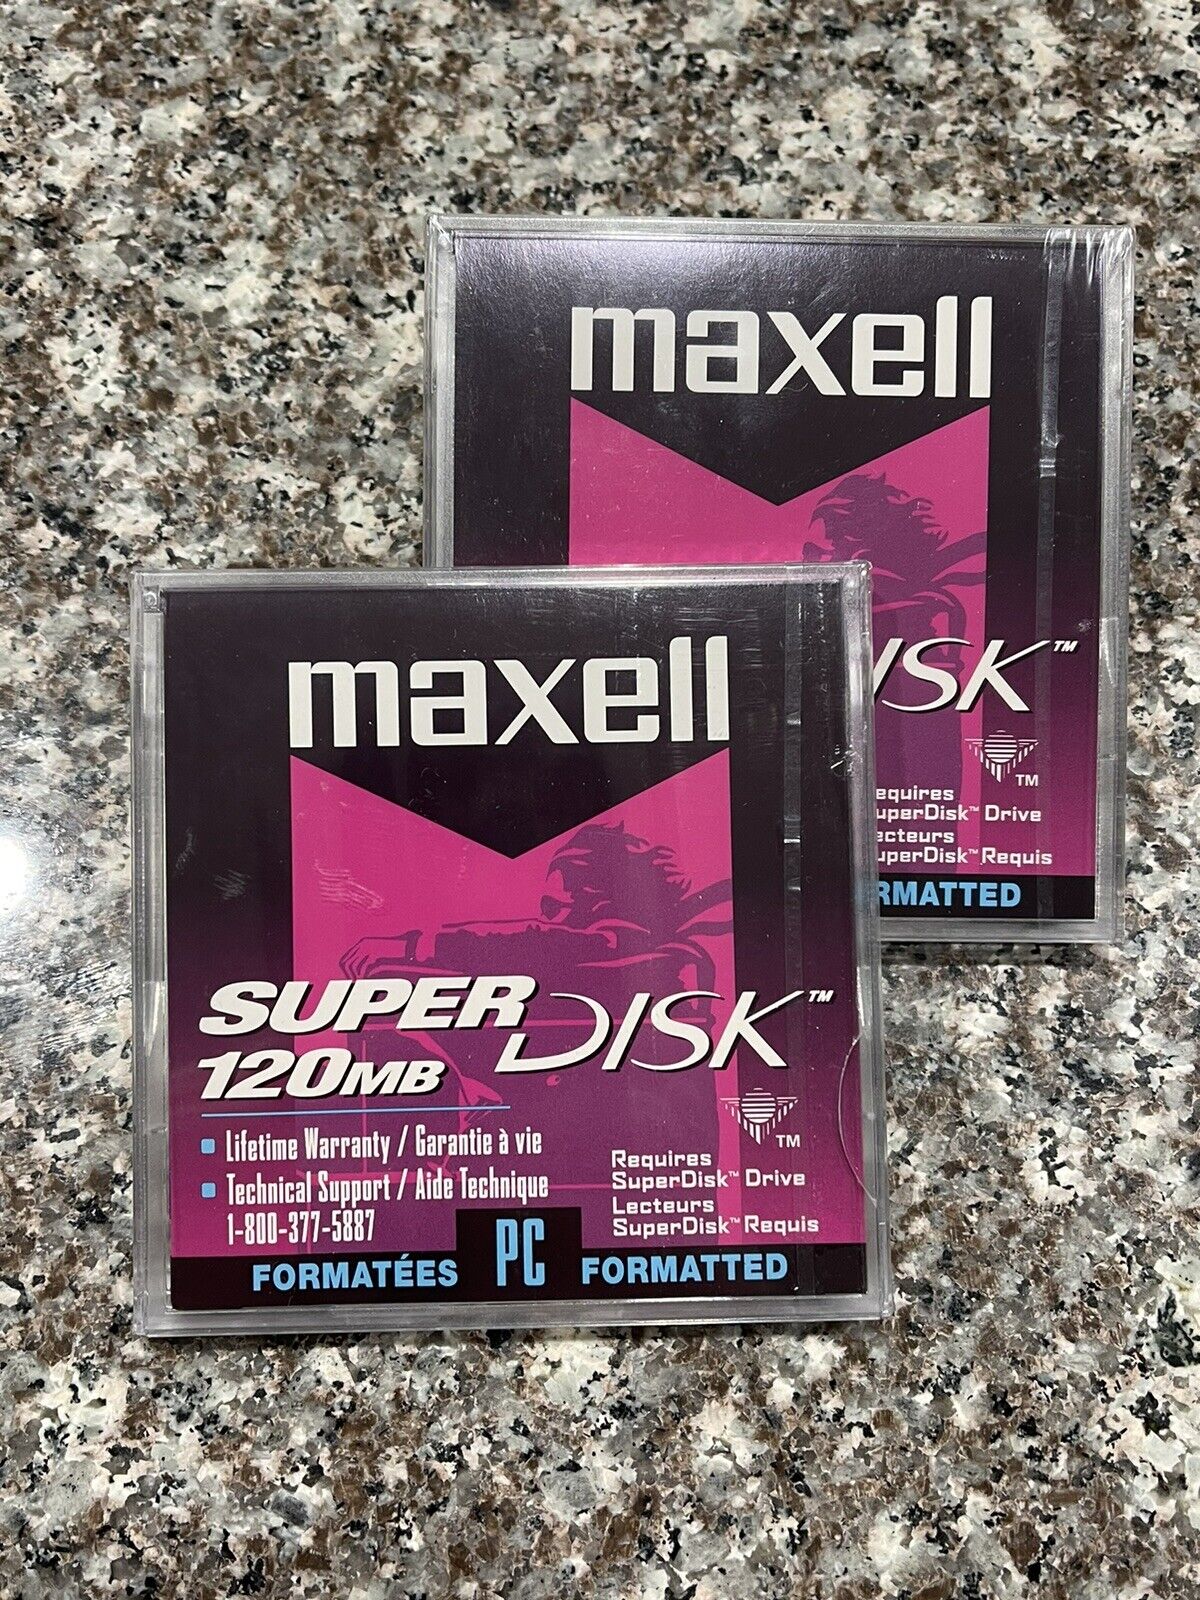 2 NEW Sealed PACKAGE MAXELL LS-120 SUPER DISK 120MB - PC DOS FORMATTED 